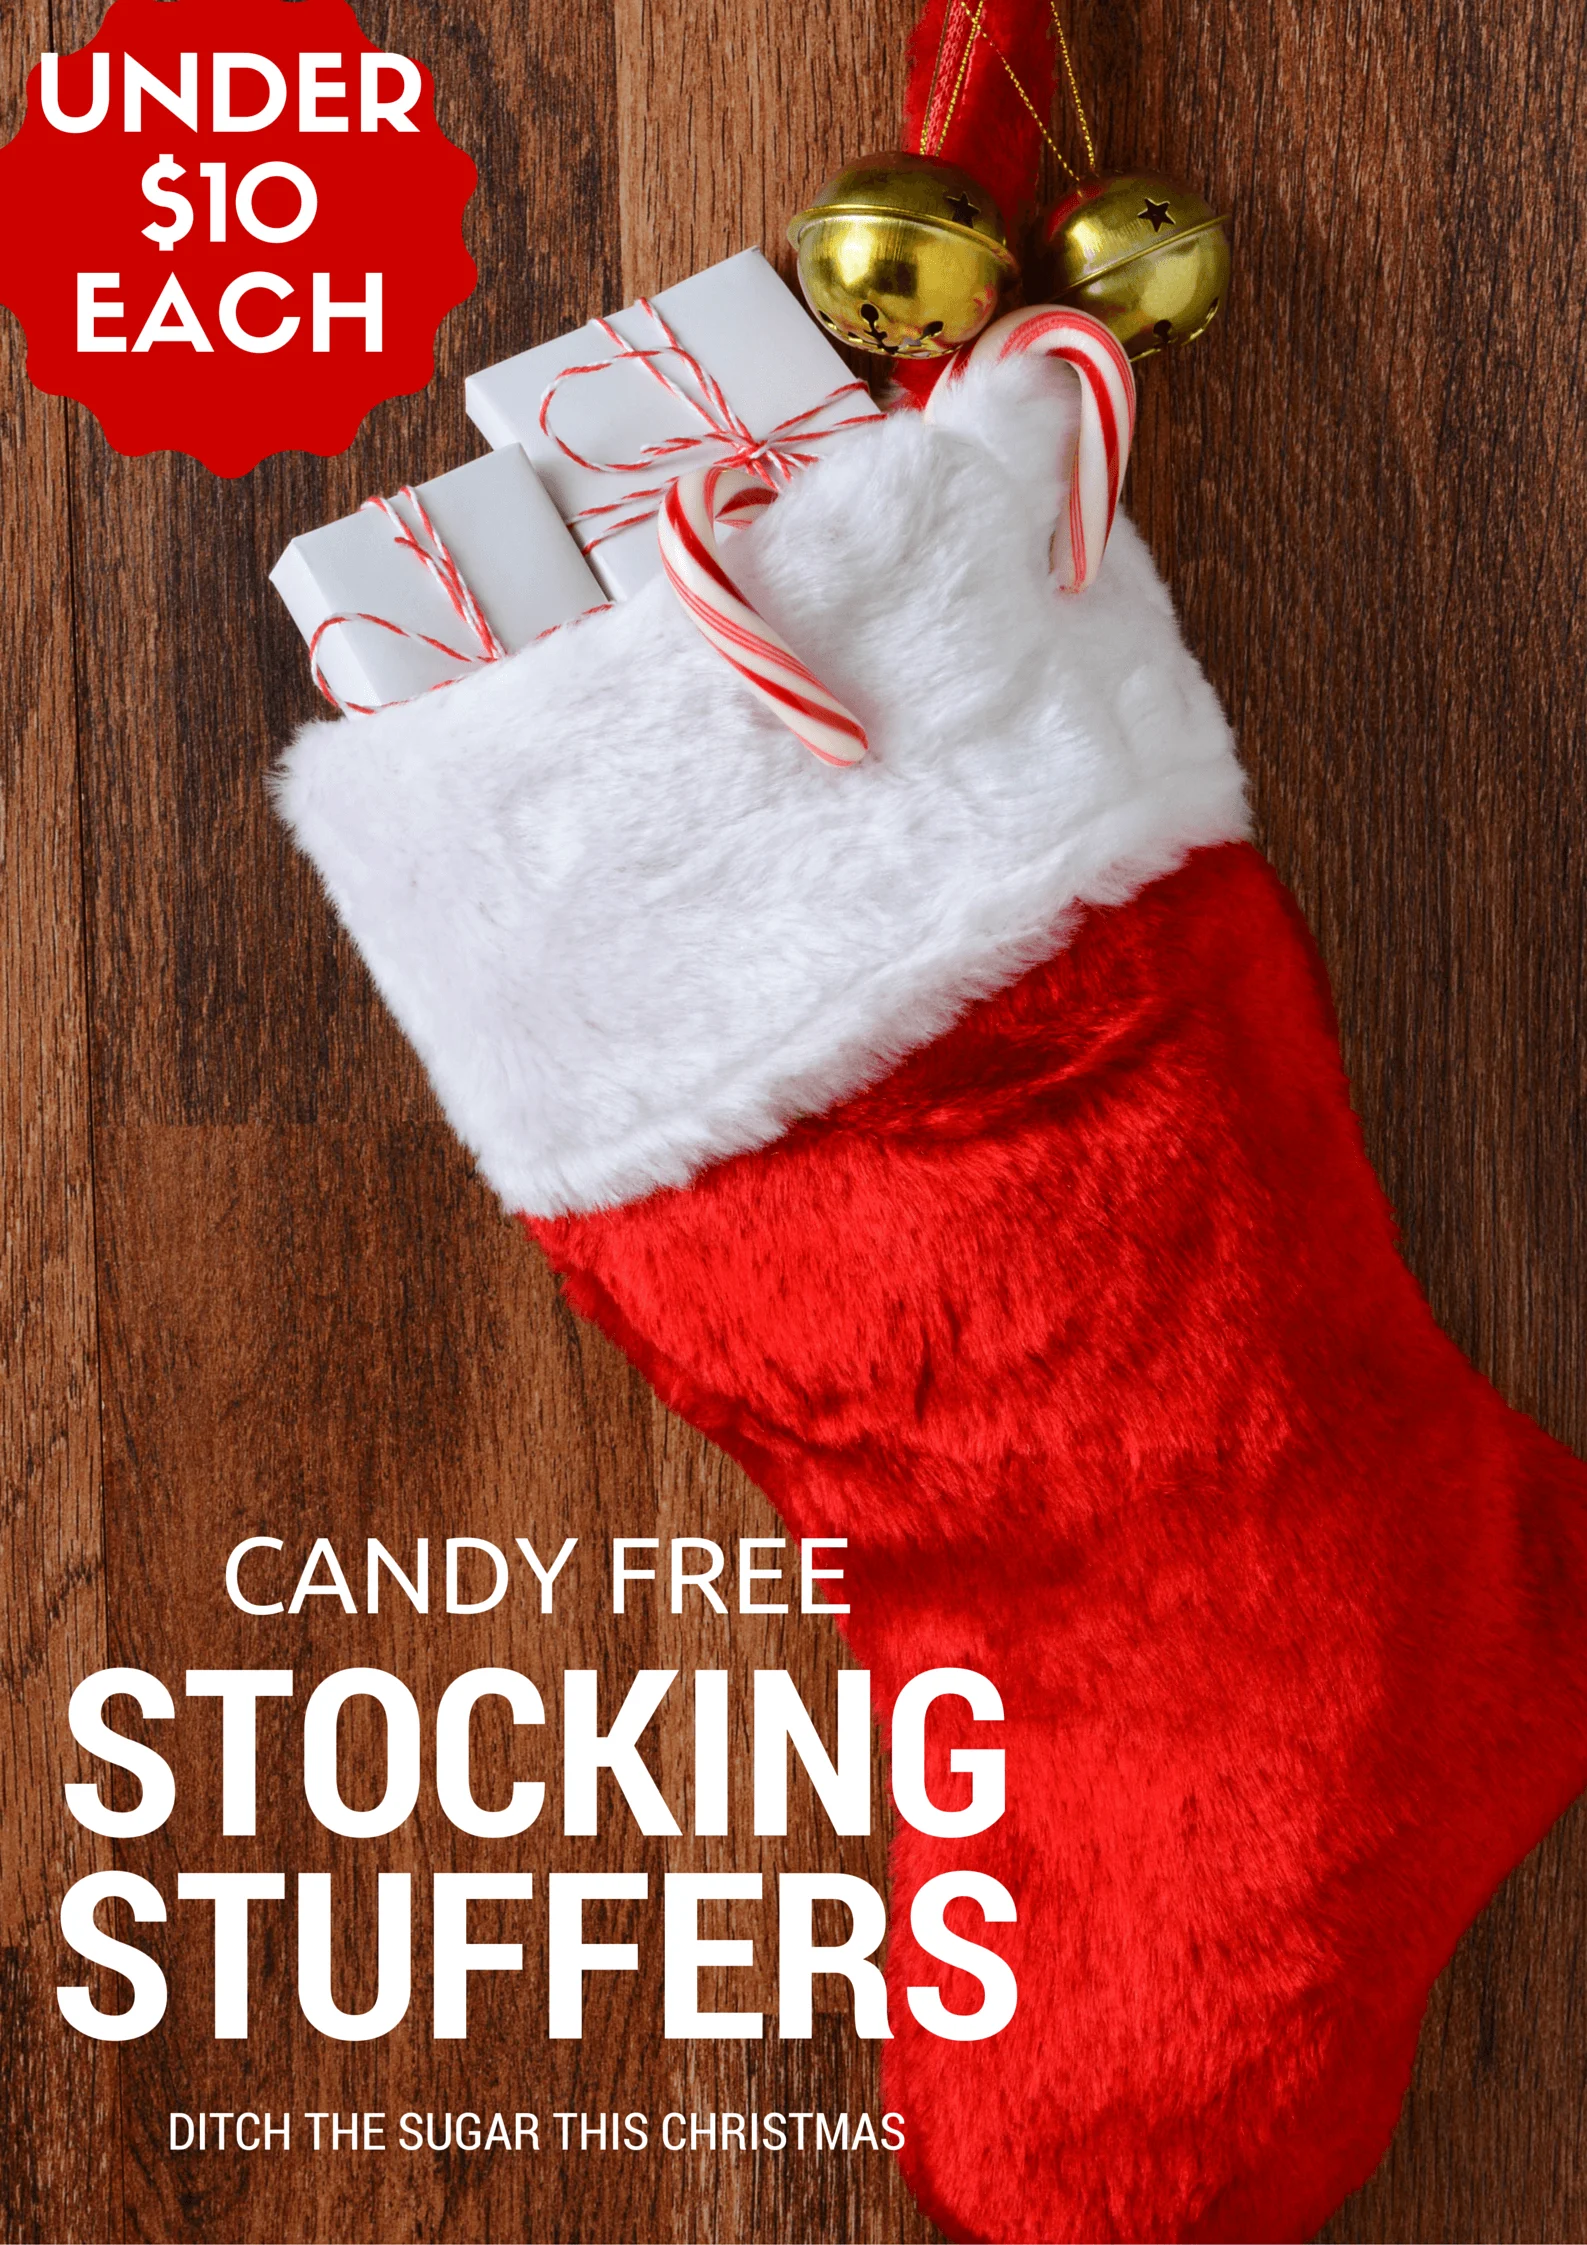 75 Stocking Stuffers Christmas Gifts for under $10